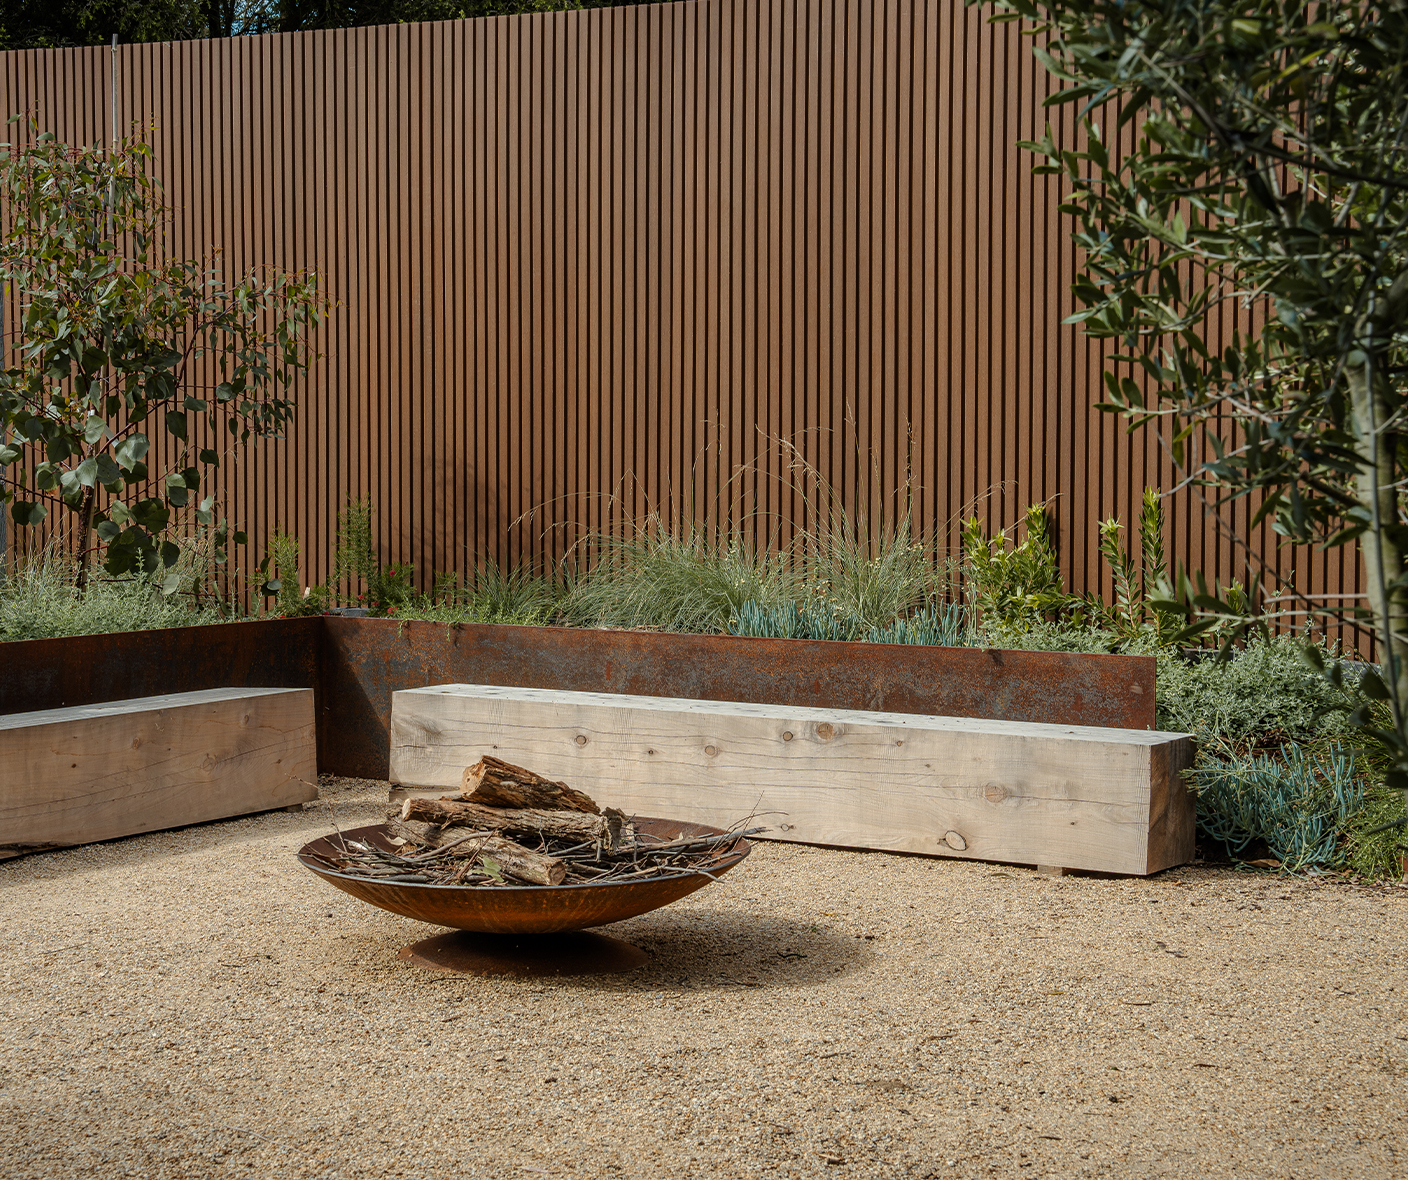 composite cladding fence with fire pit, bench seating and shrubbery